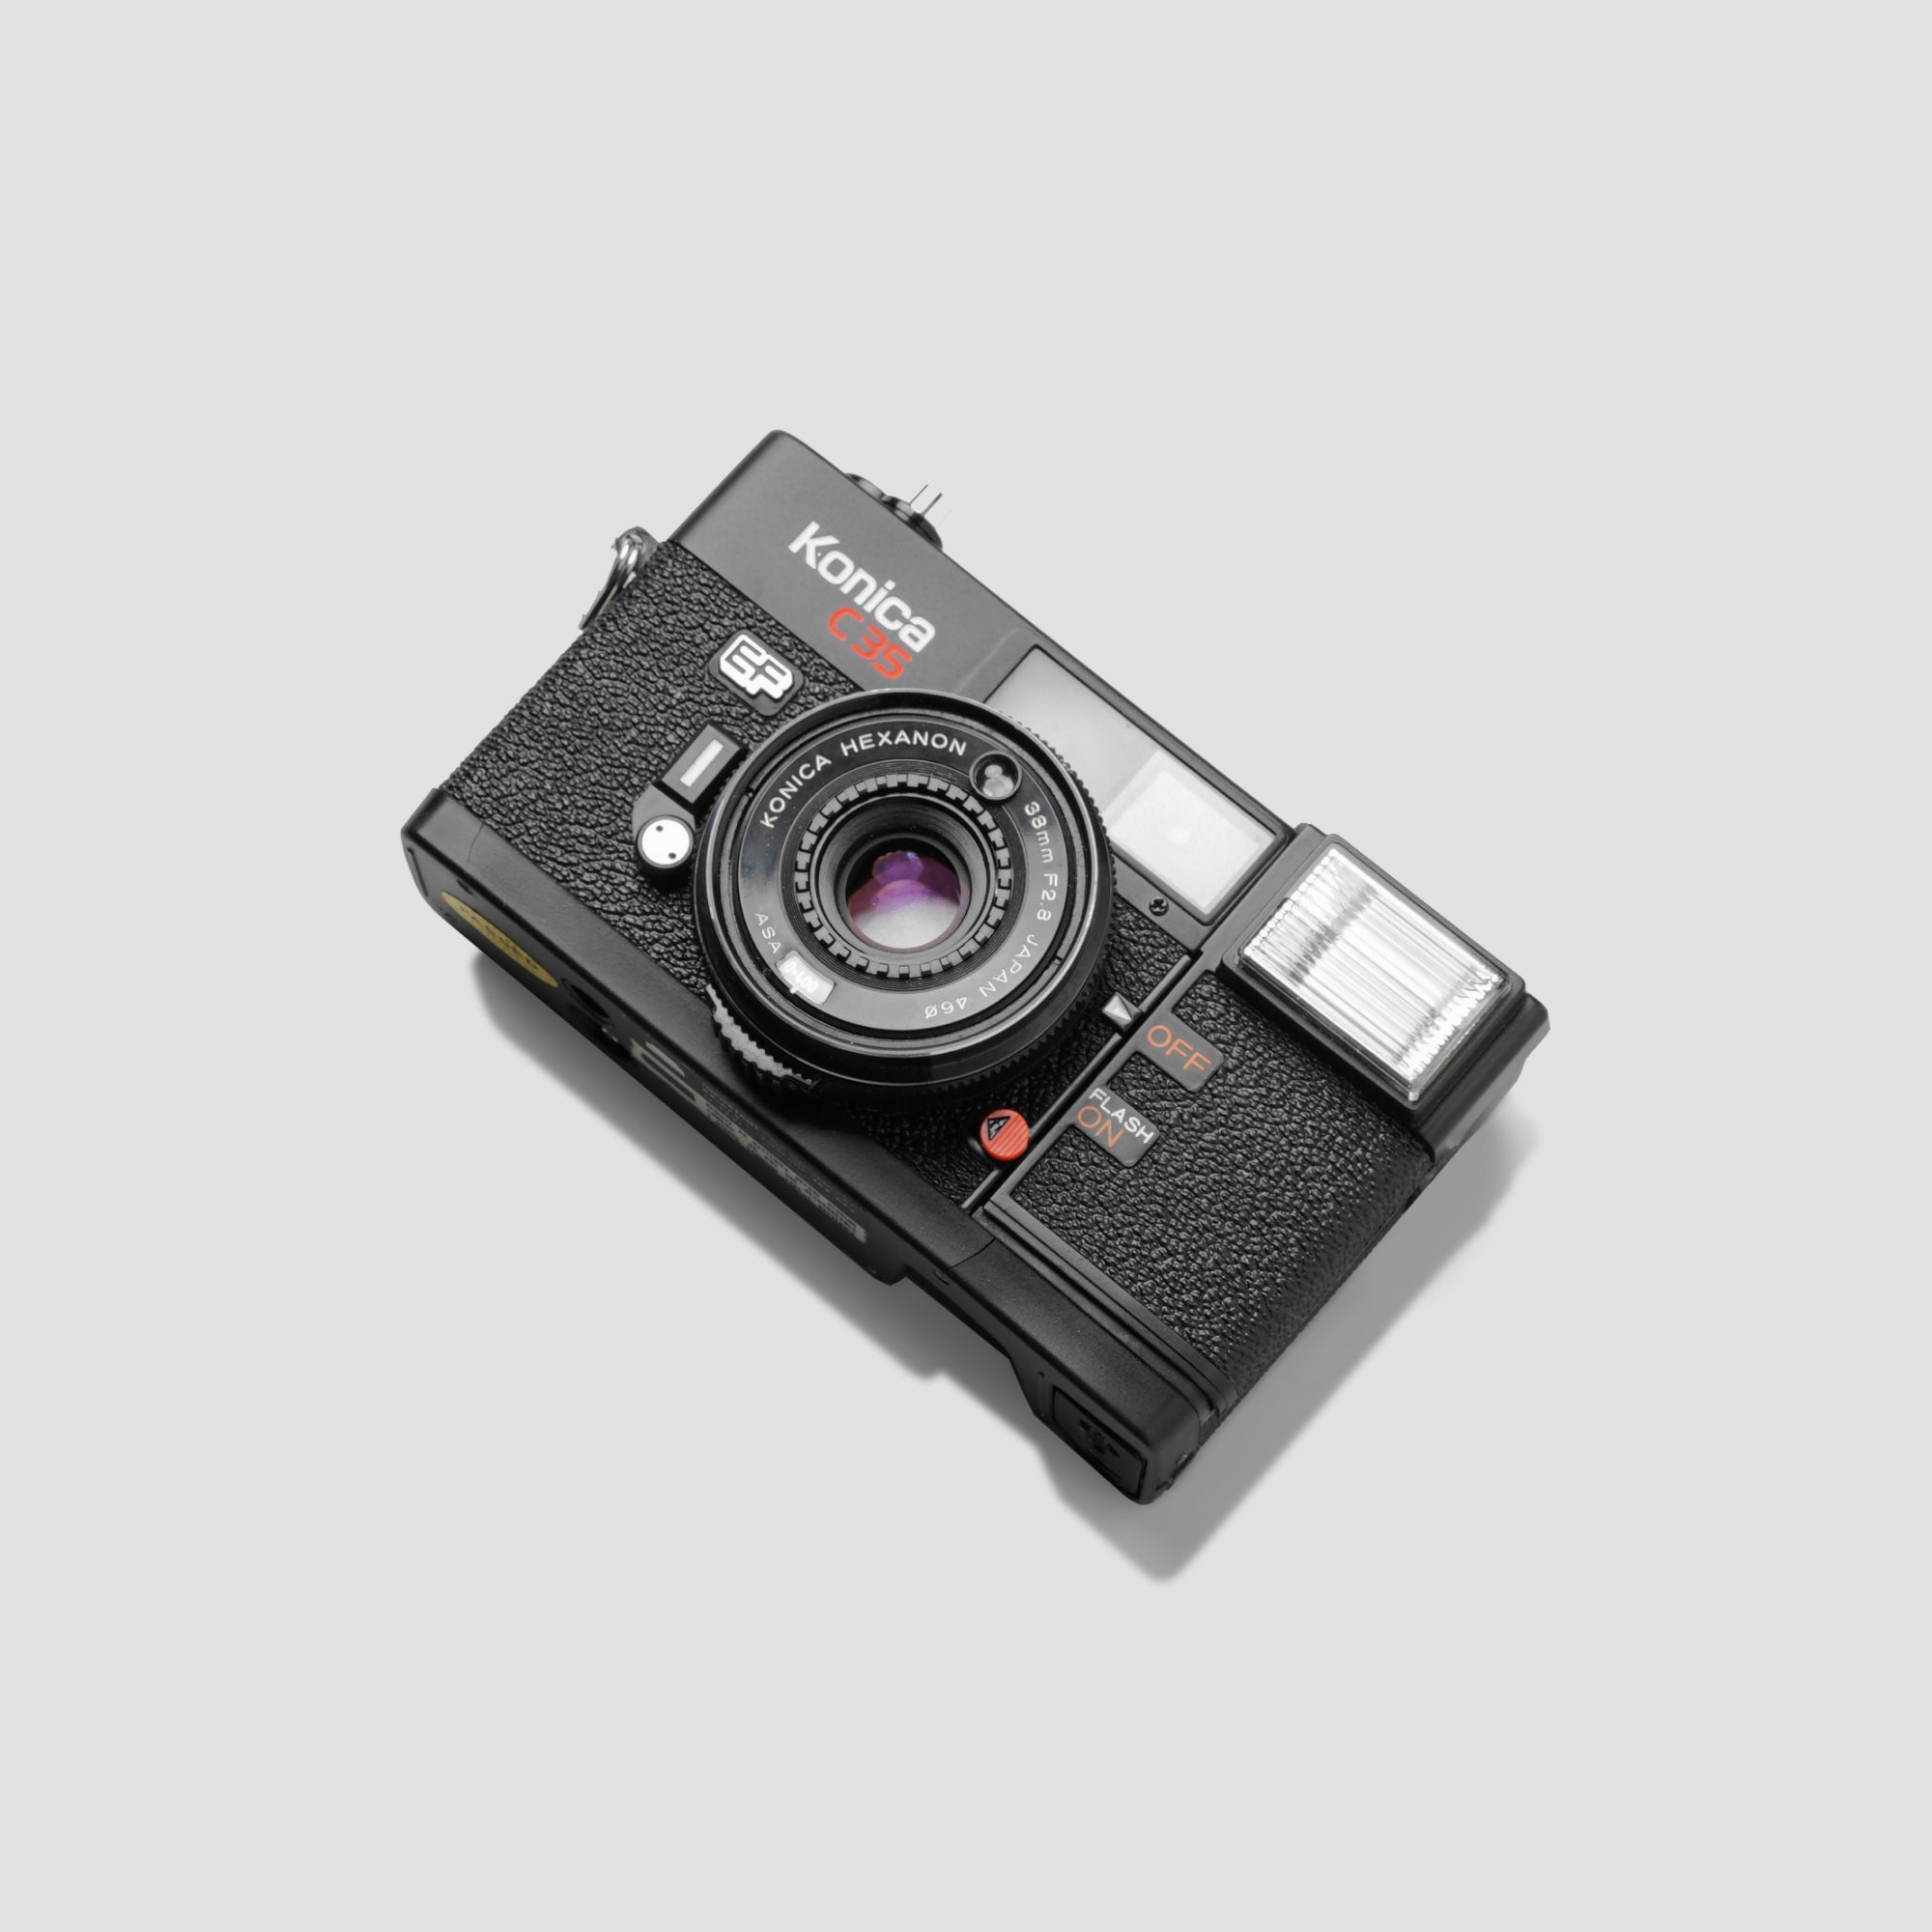 Buy Konica C35 EF now at Analogue Amsterdam